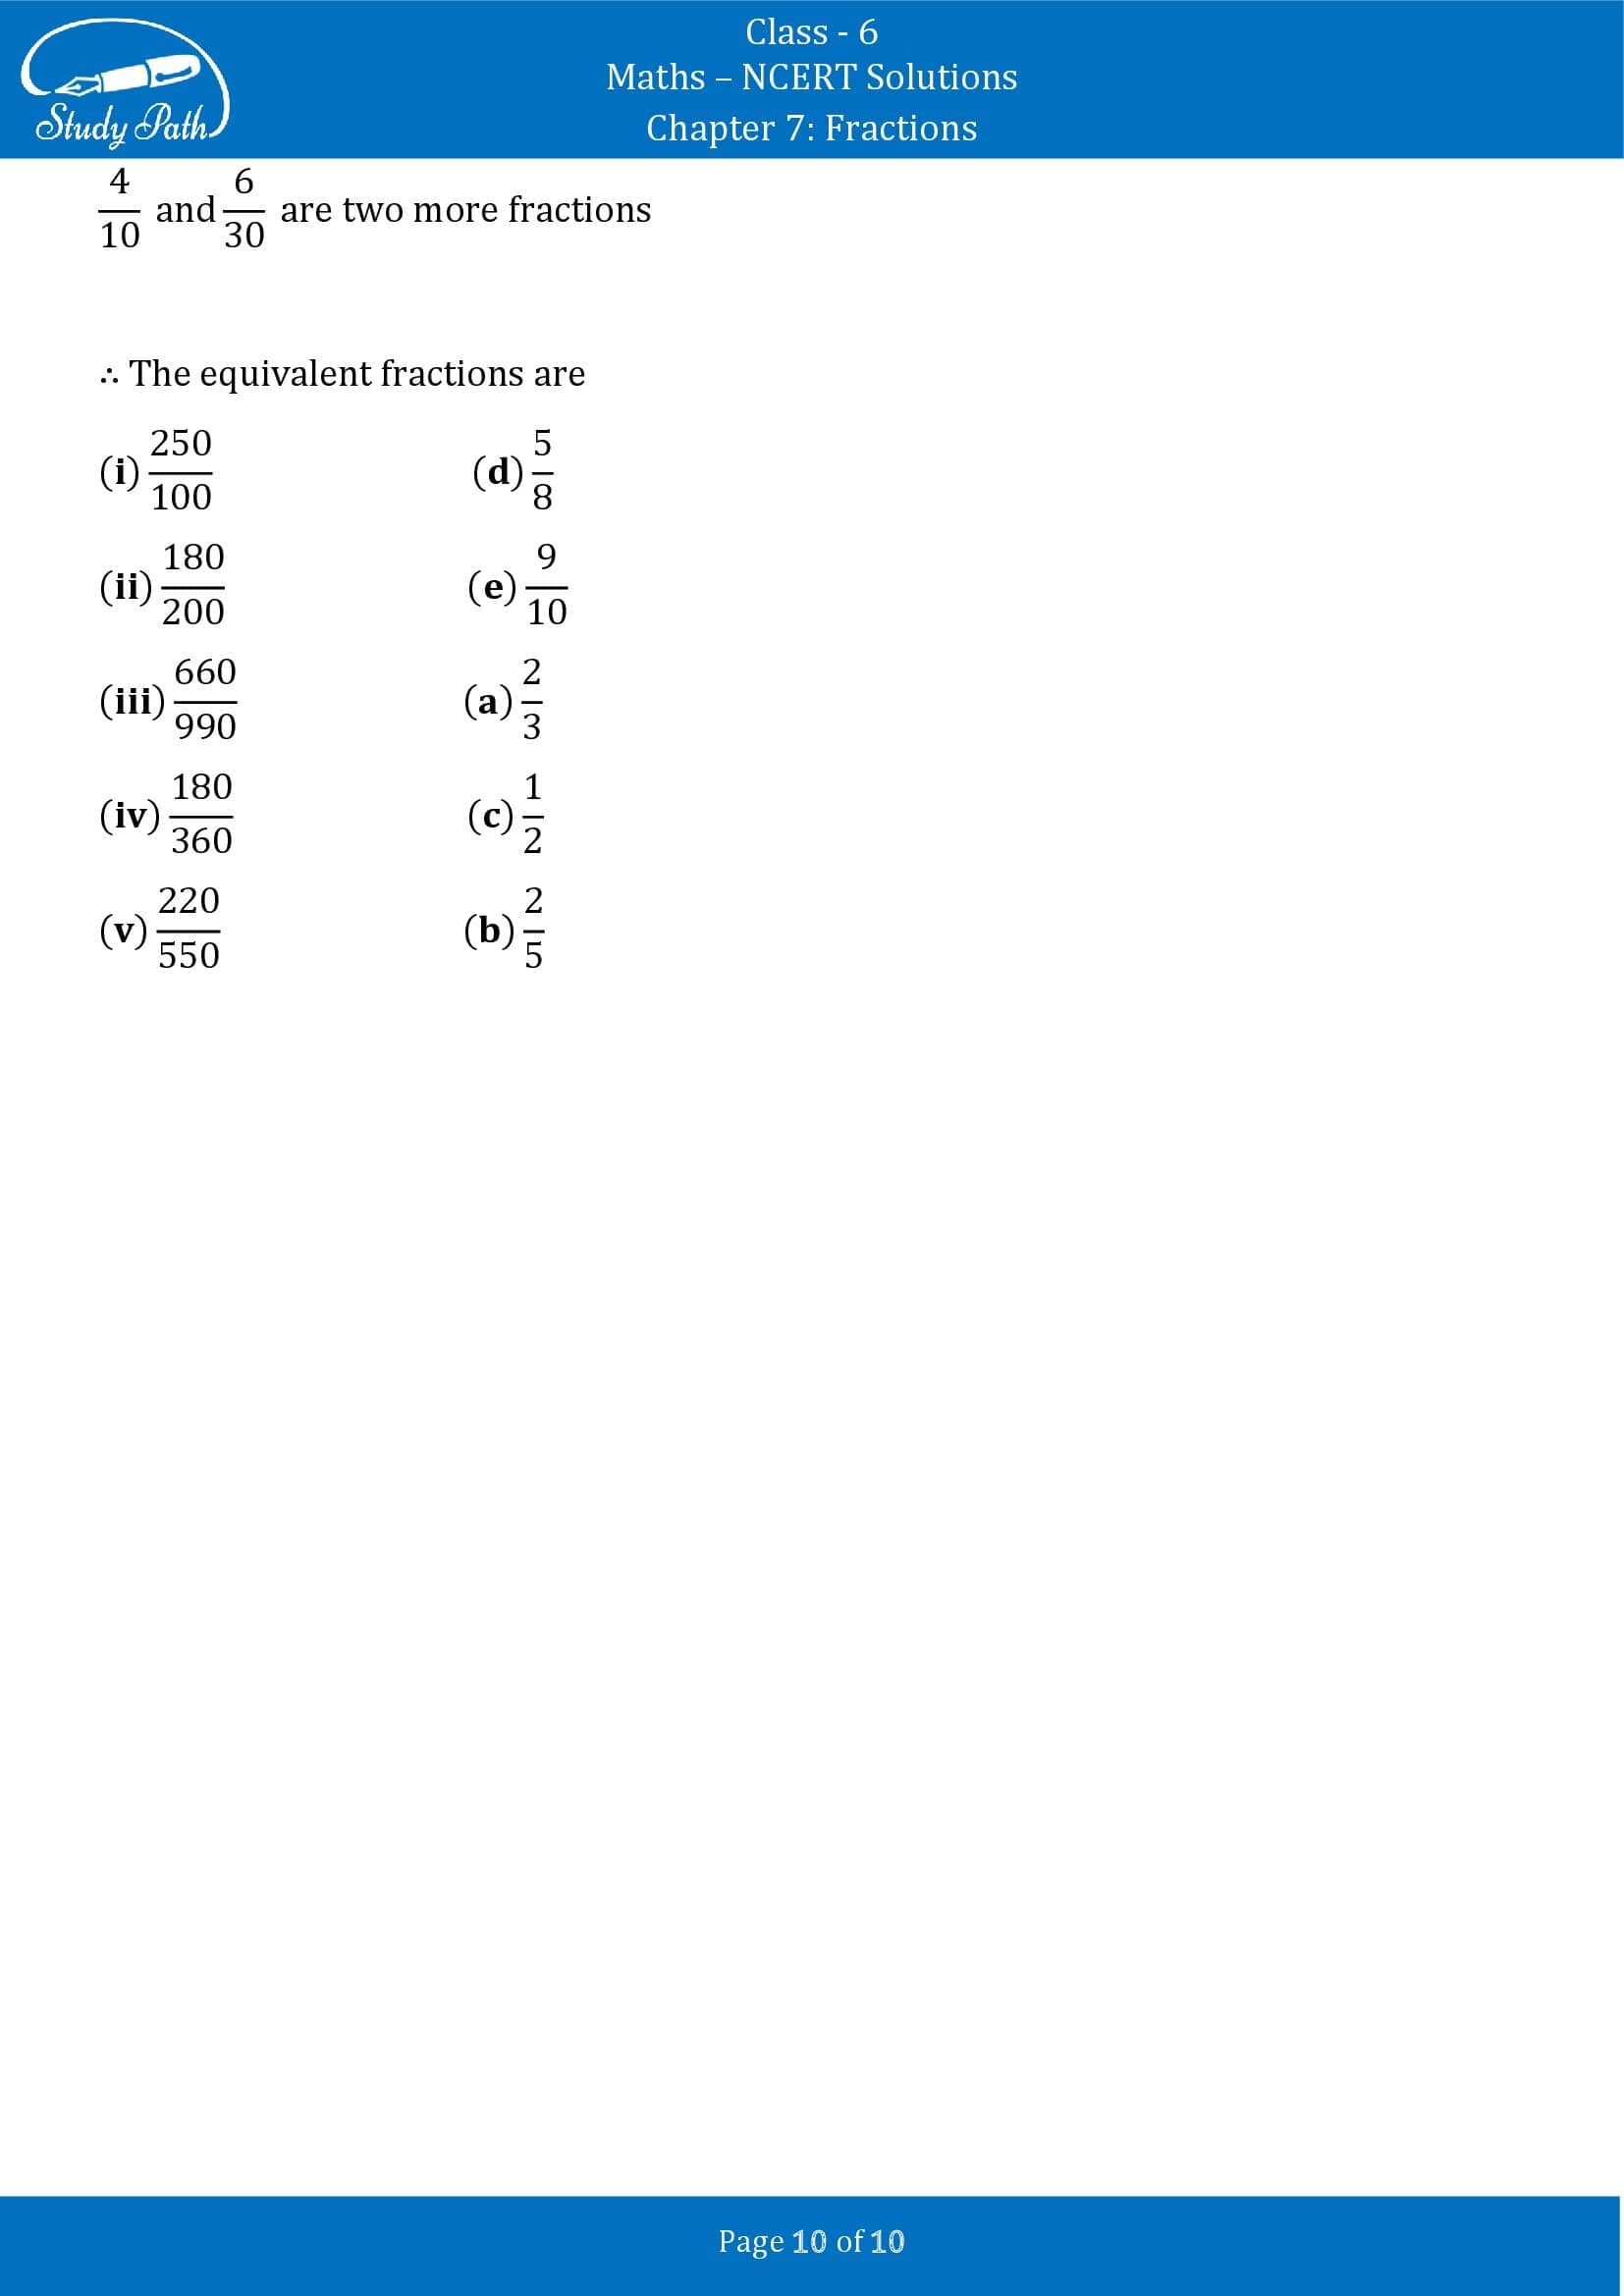 NCERT Solutions for Class 6 Maths Chapter 7 Fractions Exercise 7.3 00010